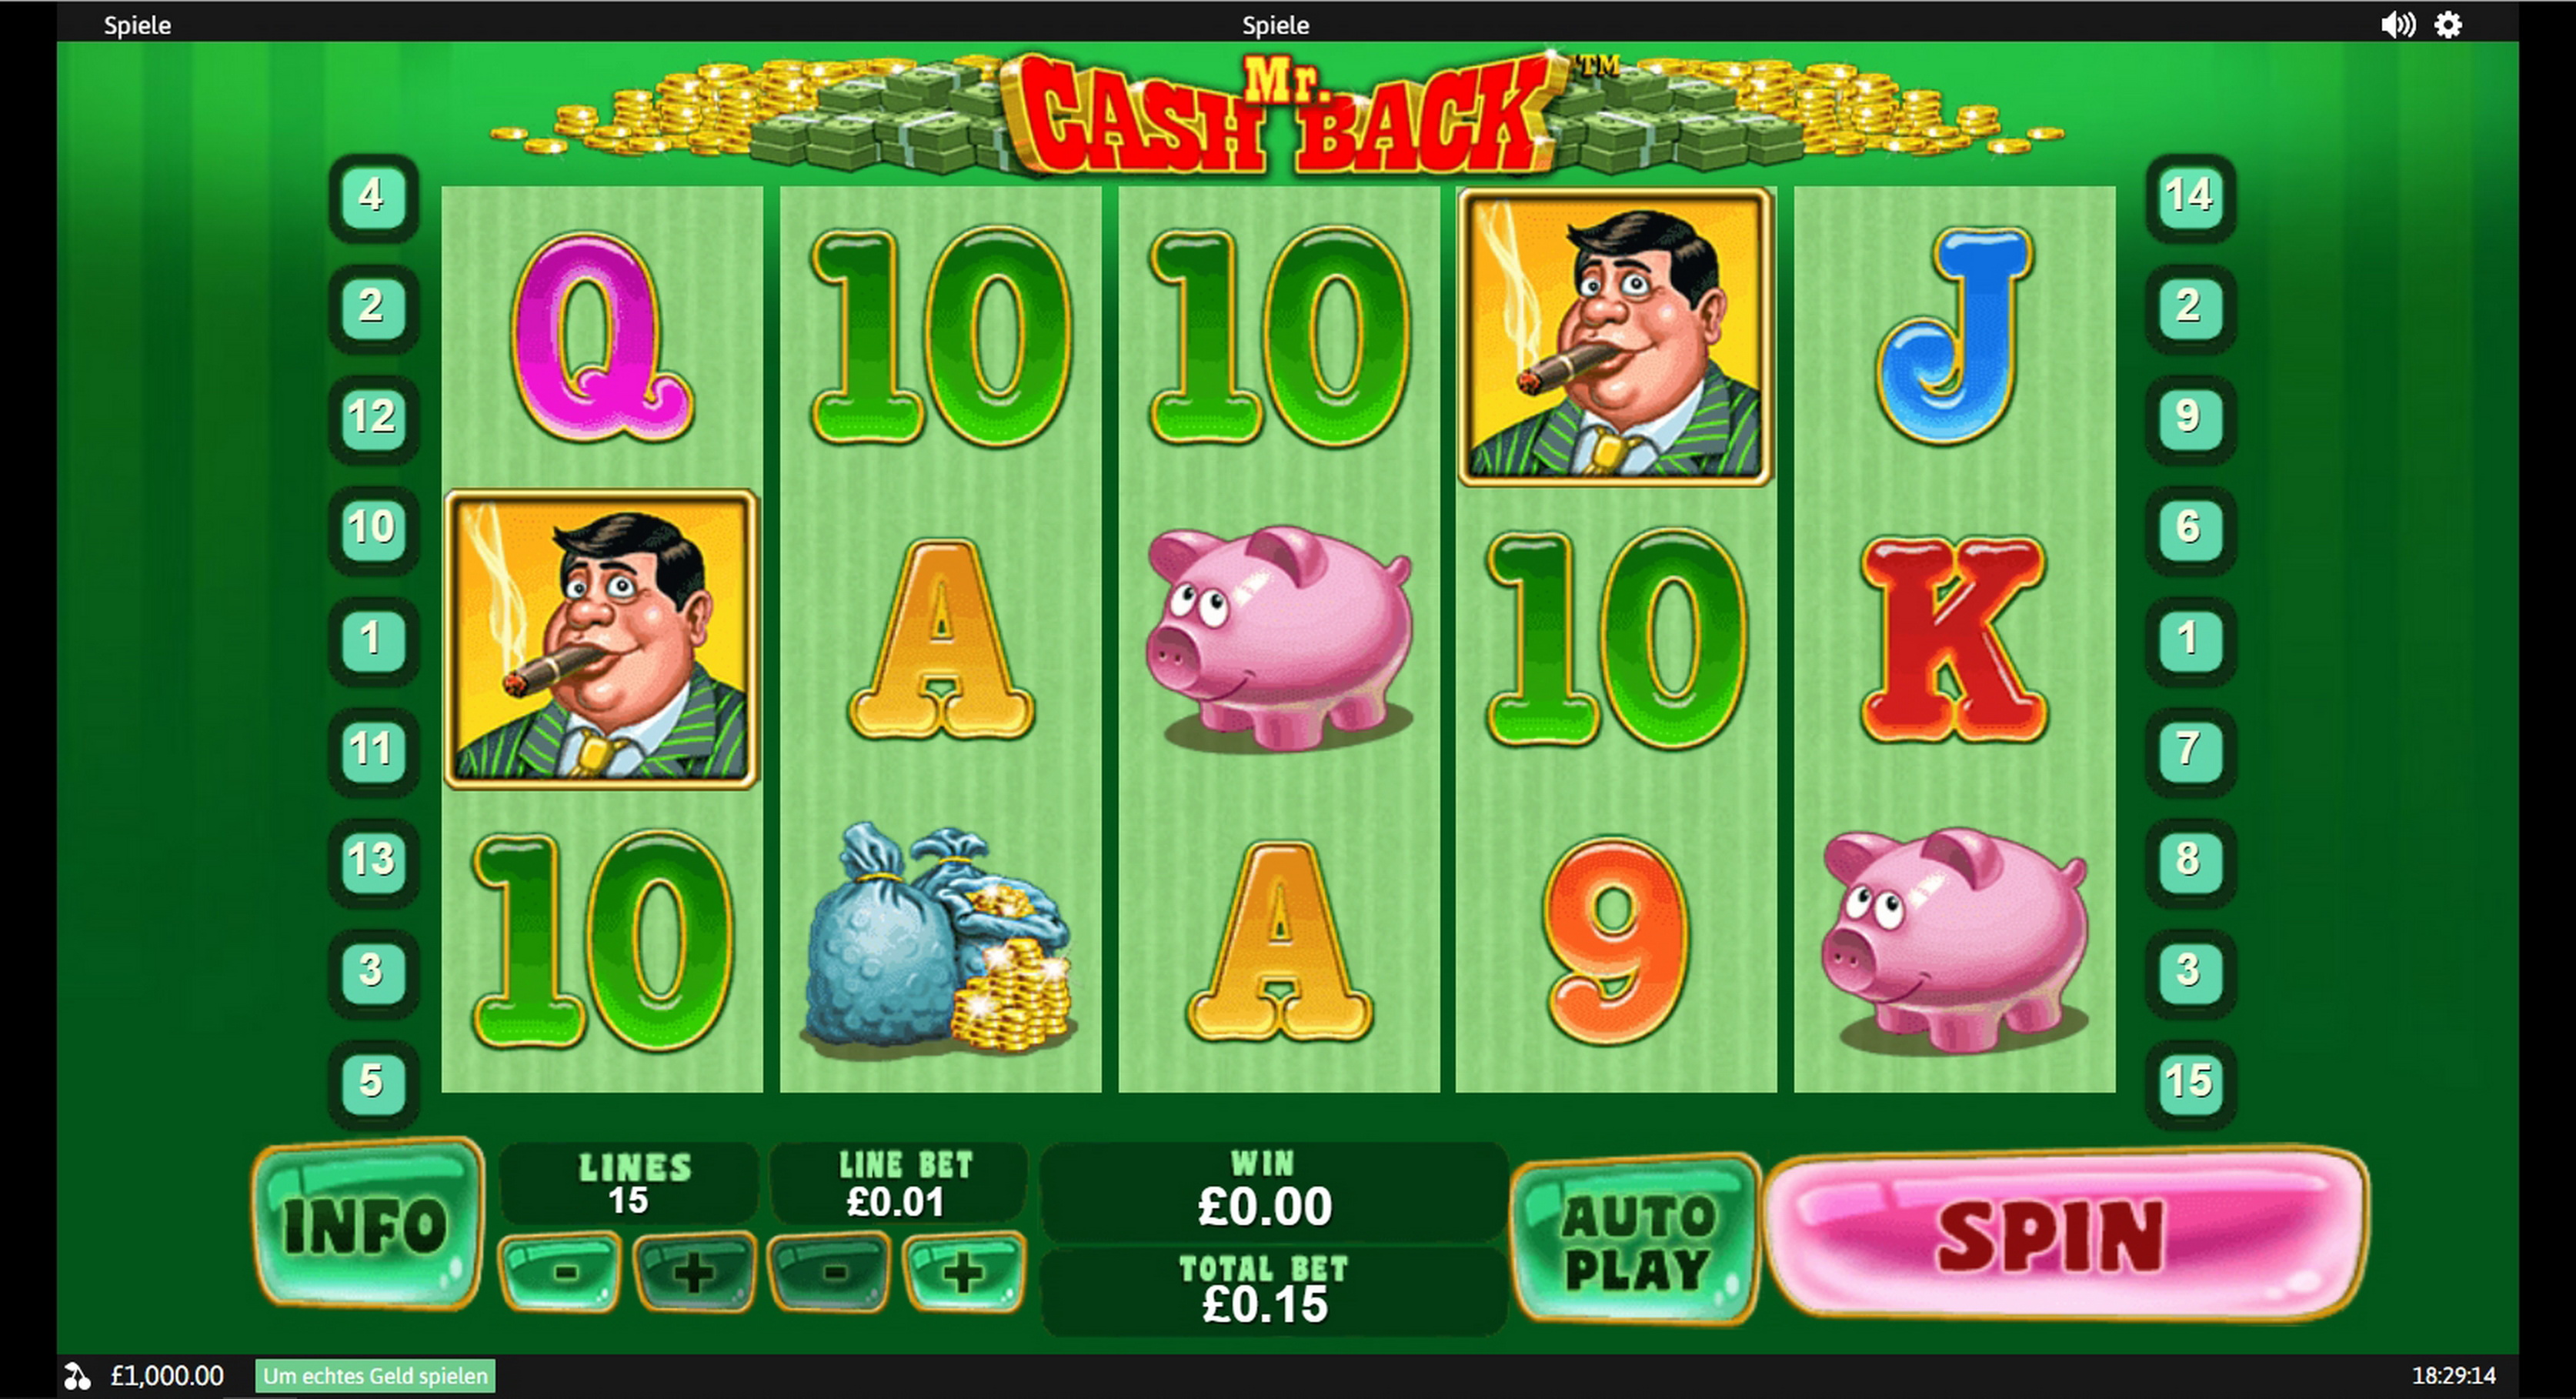 Reels in MR. Cashback Slot Game by Playtech